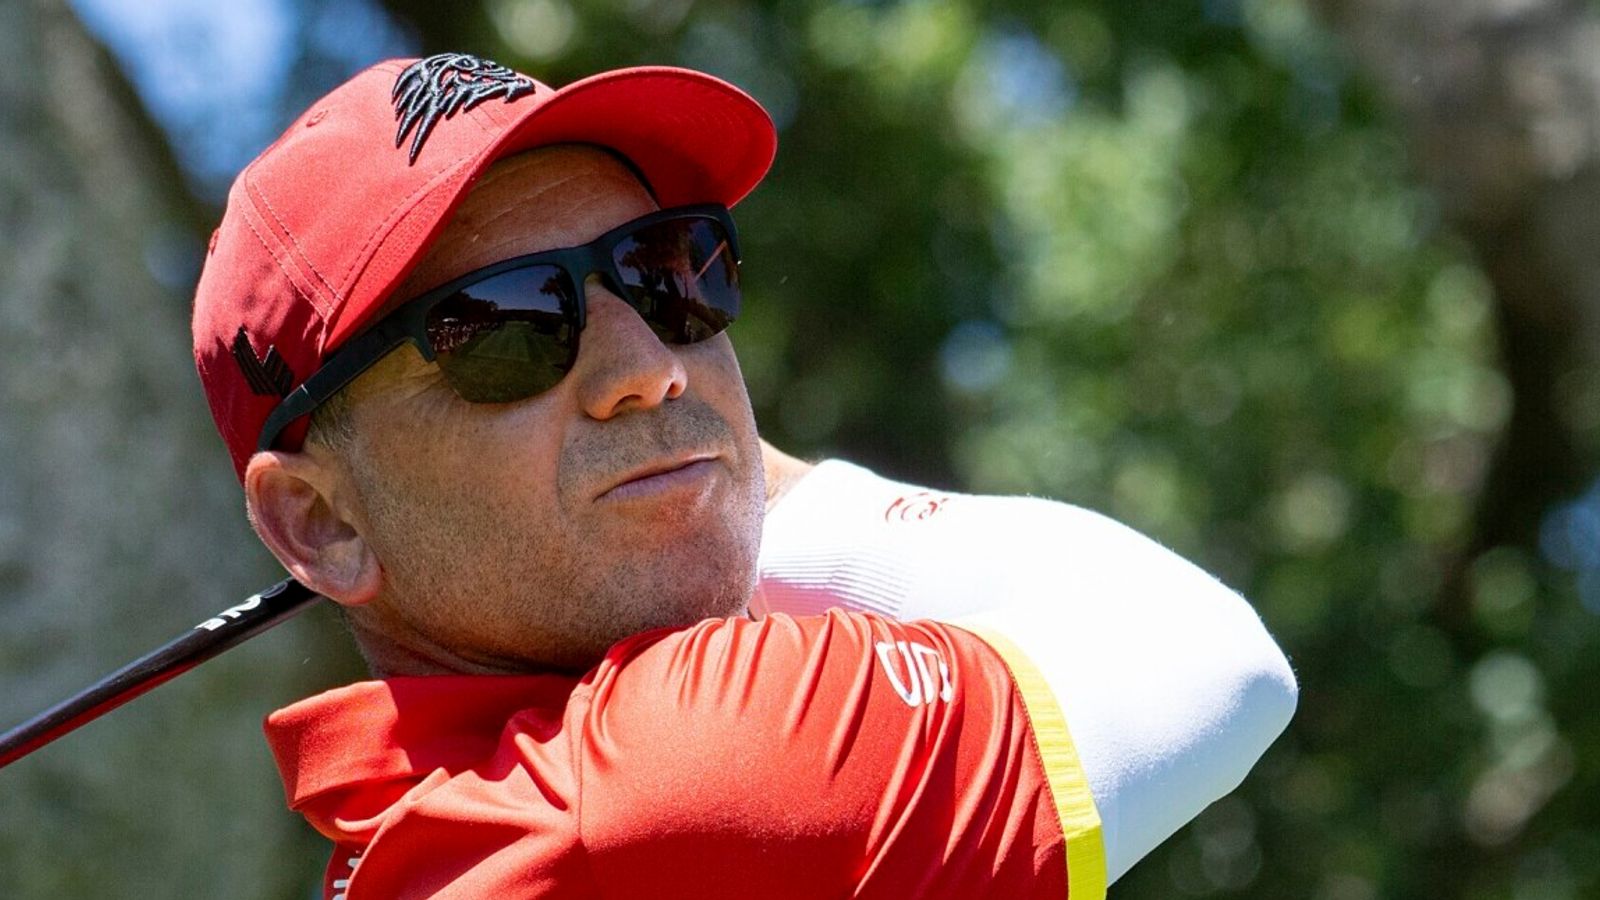 LIV Golf Andalucia: Sergio Garcia takes first individual win and vows to keep pushing for the majors